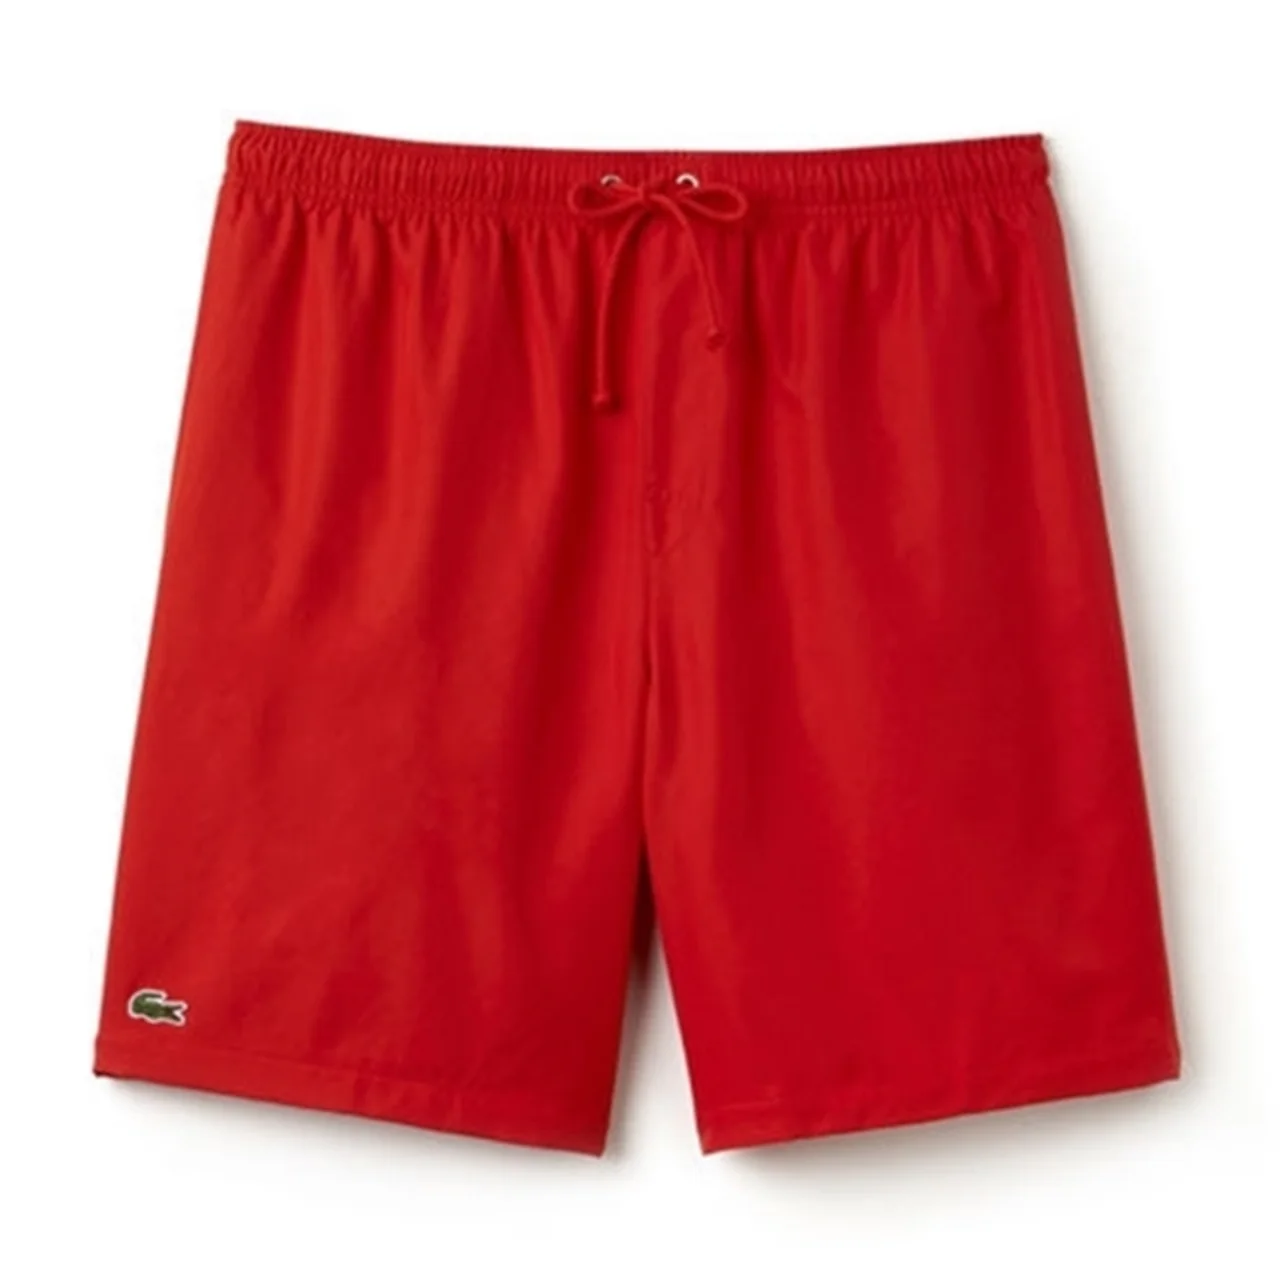 Lacoste Shorts Solid Diamond Red Size L